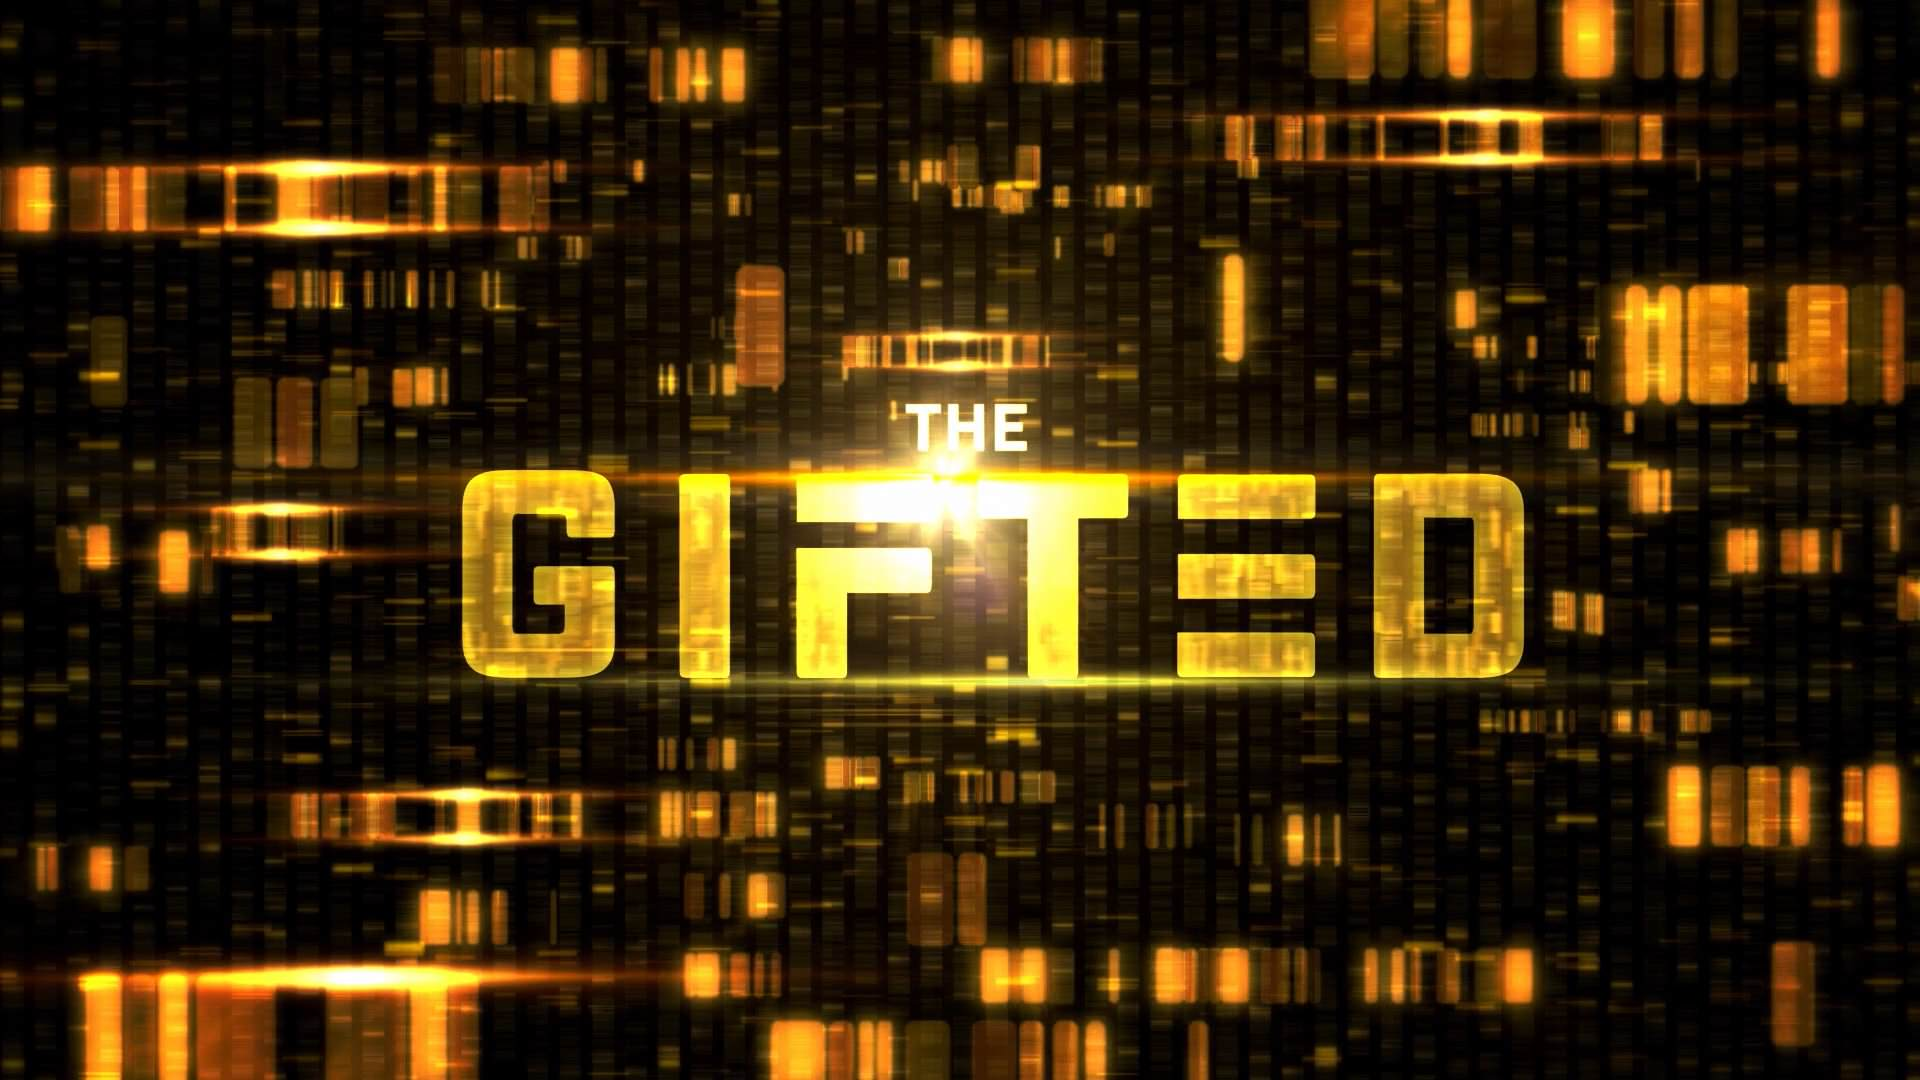 The Blog of Delights: The Gifted - Episodes 2 and 3